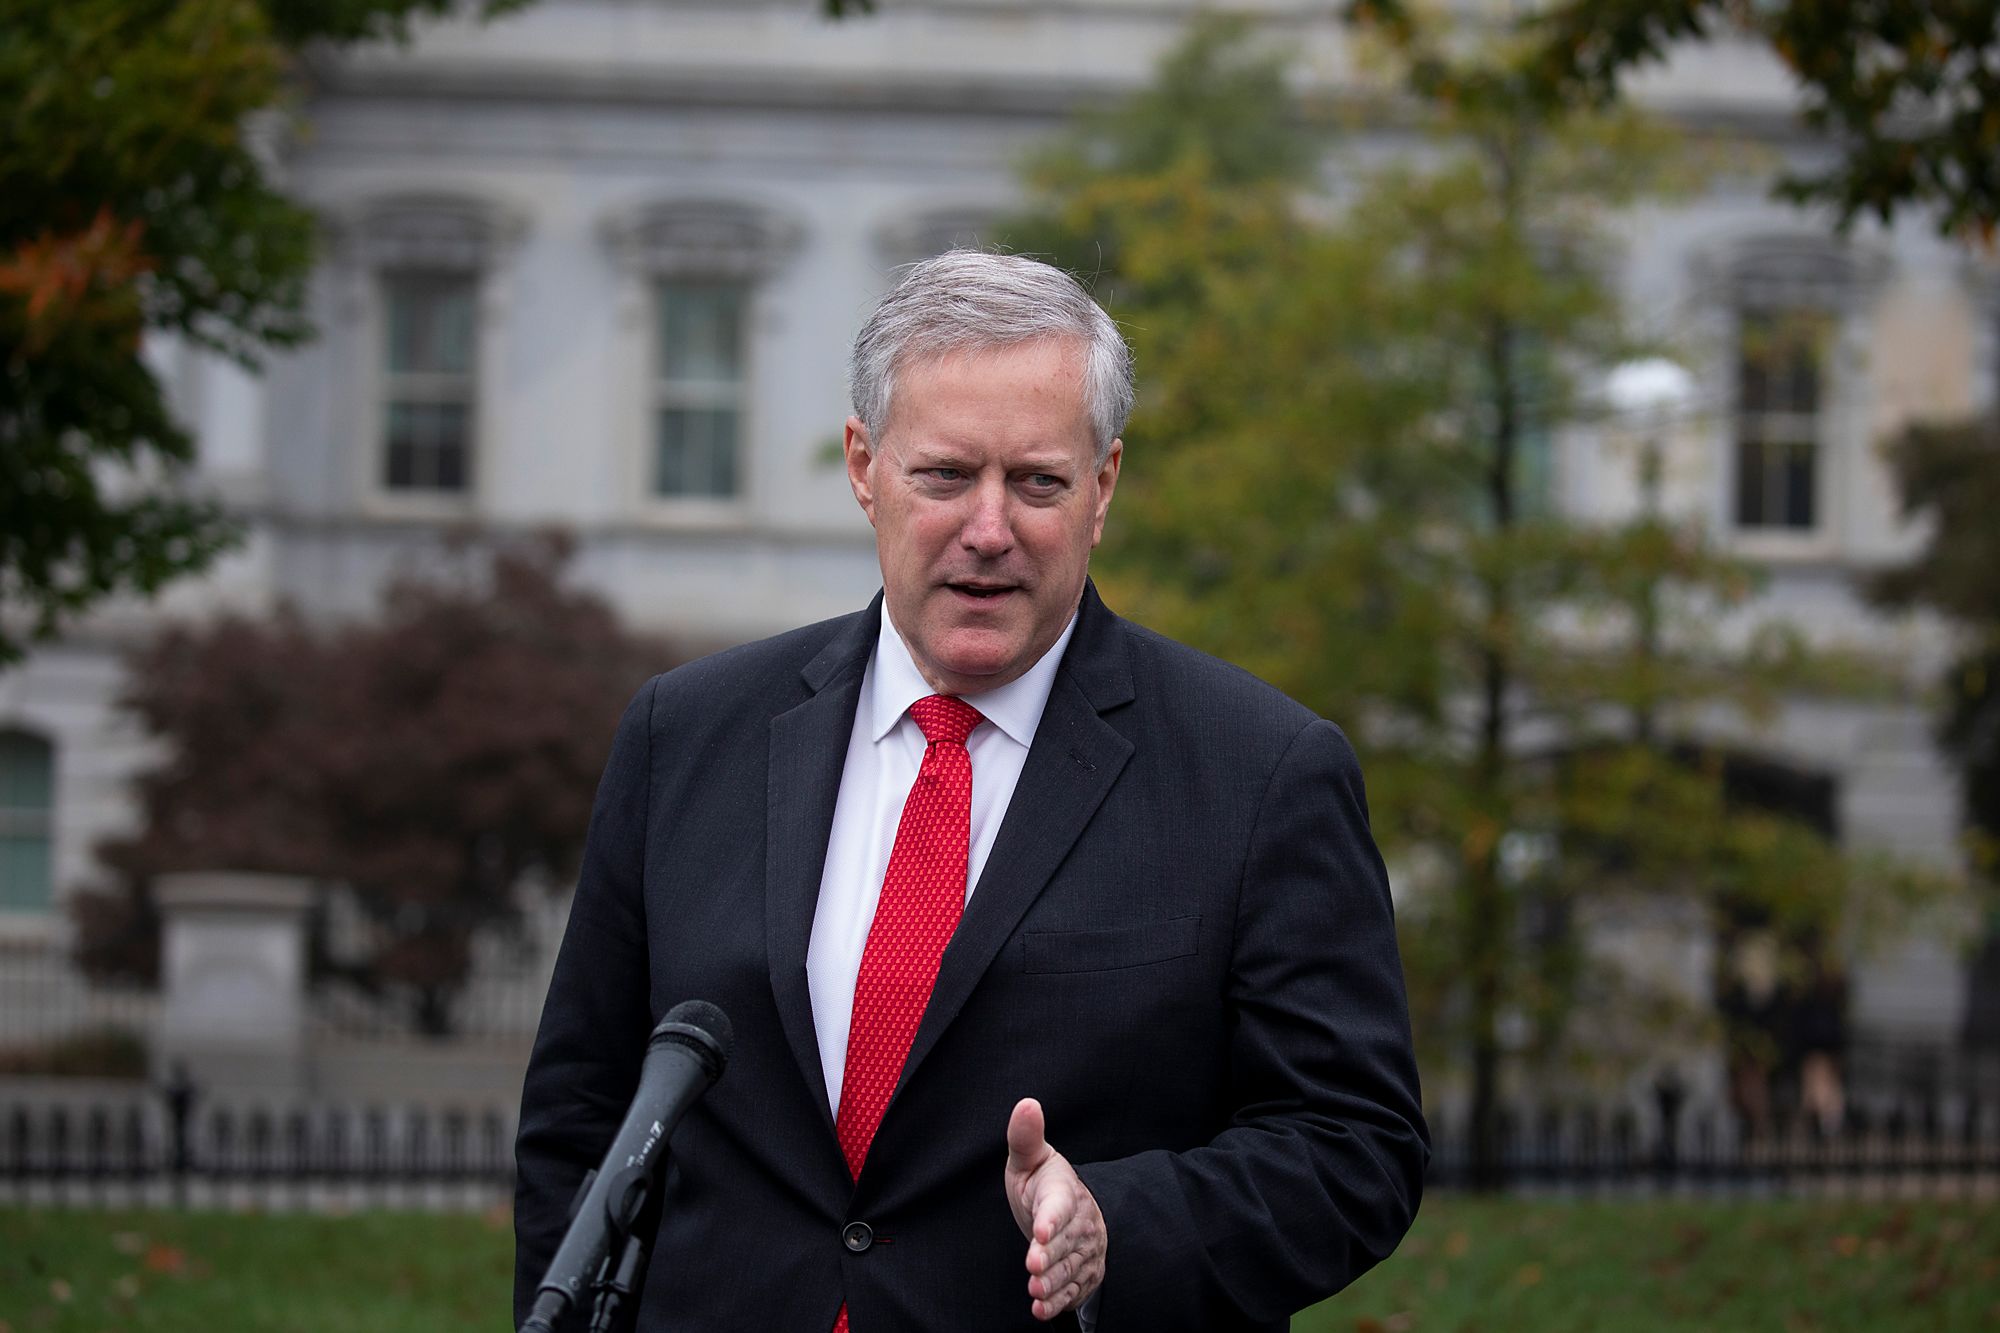 A federal judge on September 8 rejected former White House chief of staff Mark Meadows’ bid to mo...